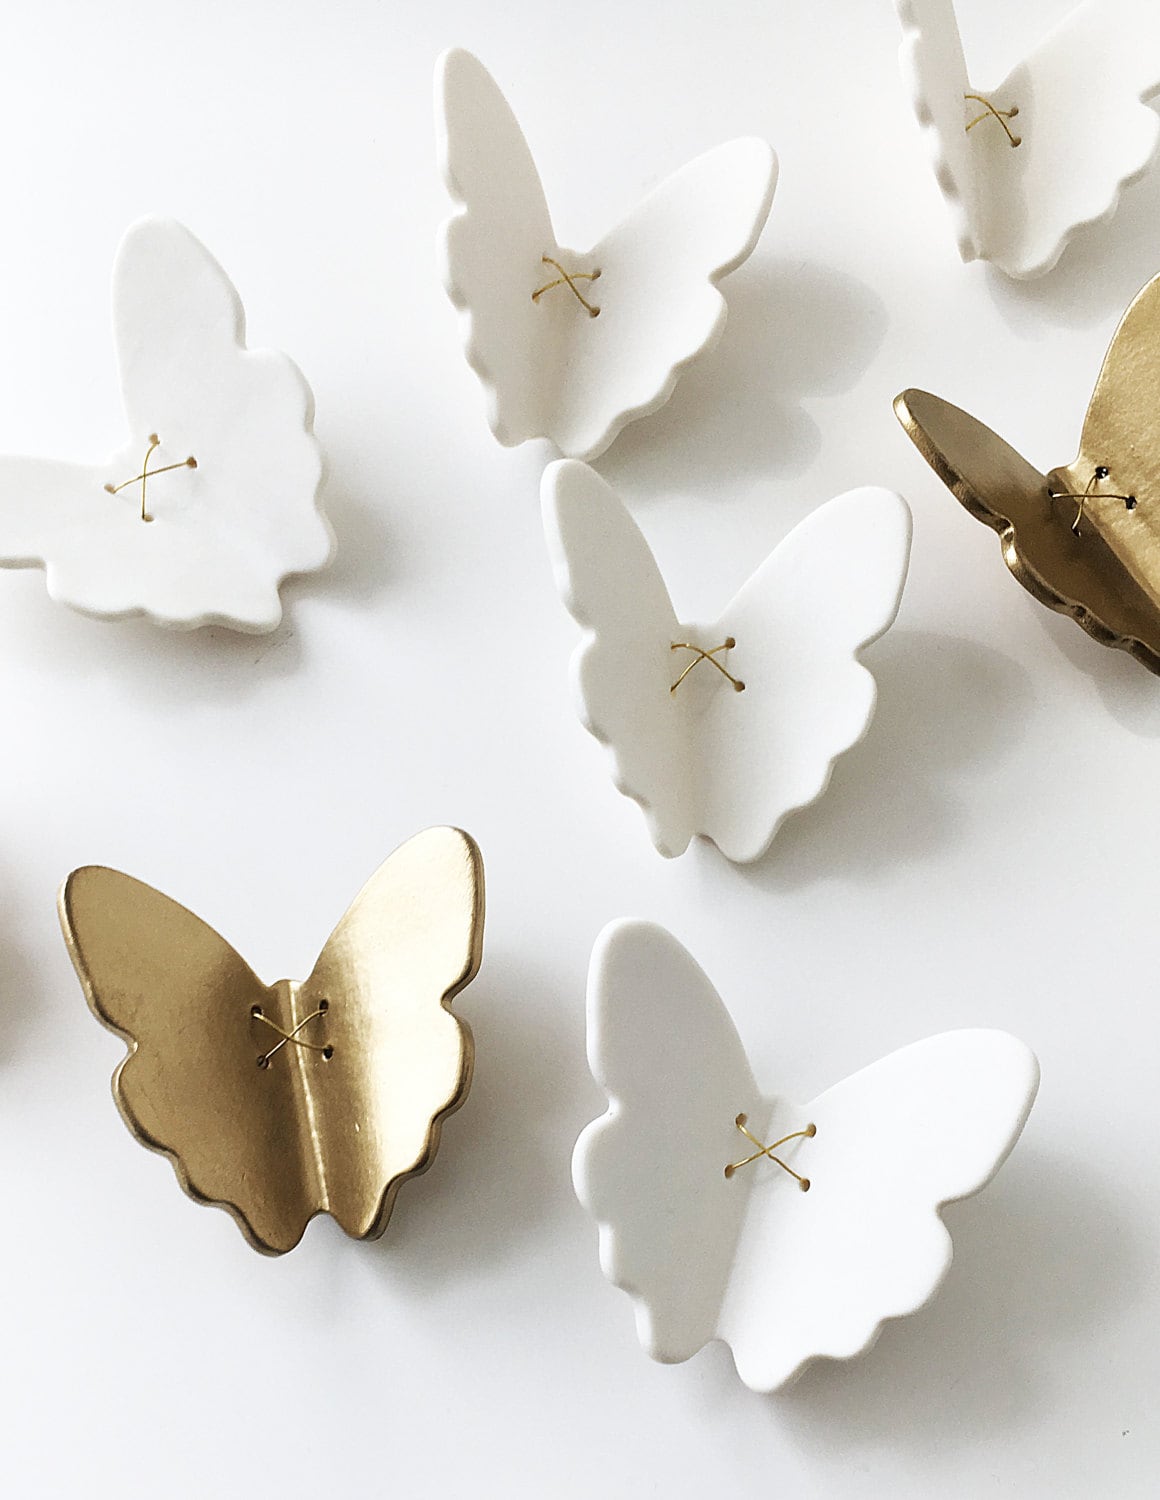 3D Butterfly wall art Gold & white porcelain ceramic butterflies Large wall art Wall sculpture Set of 11 with metal wire (9 white + 2 gold)